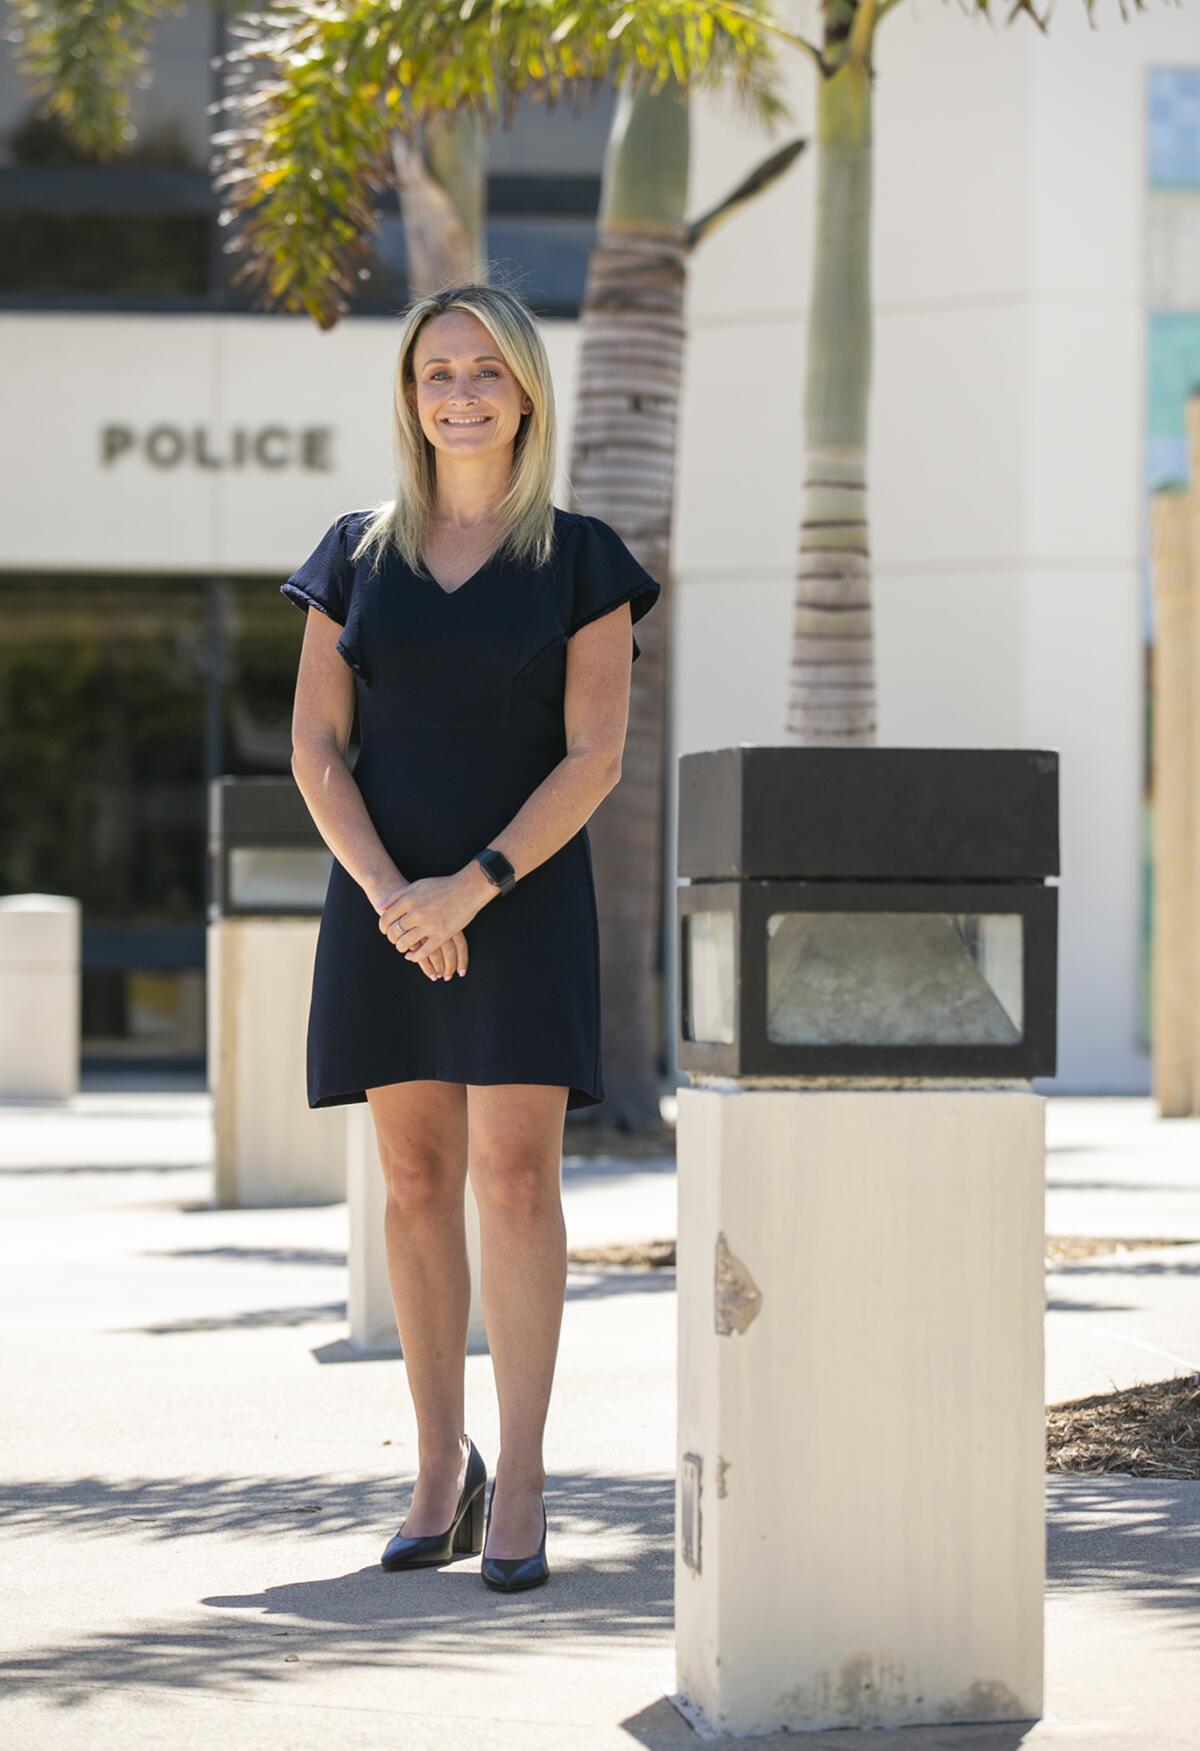 Jennifer Carey has been hired as the new Public Information Officer for the Huntington Beach Police Department.